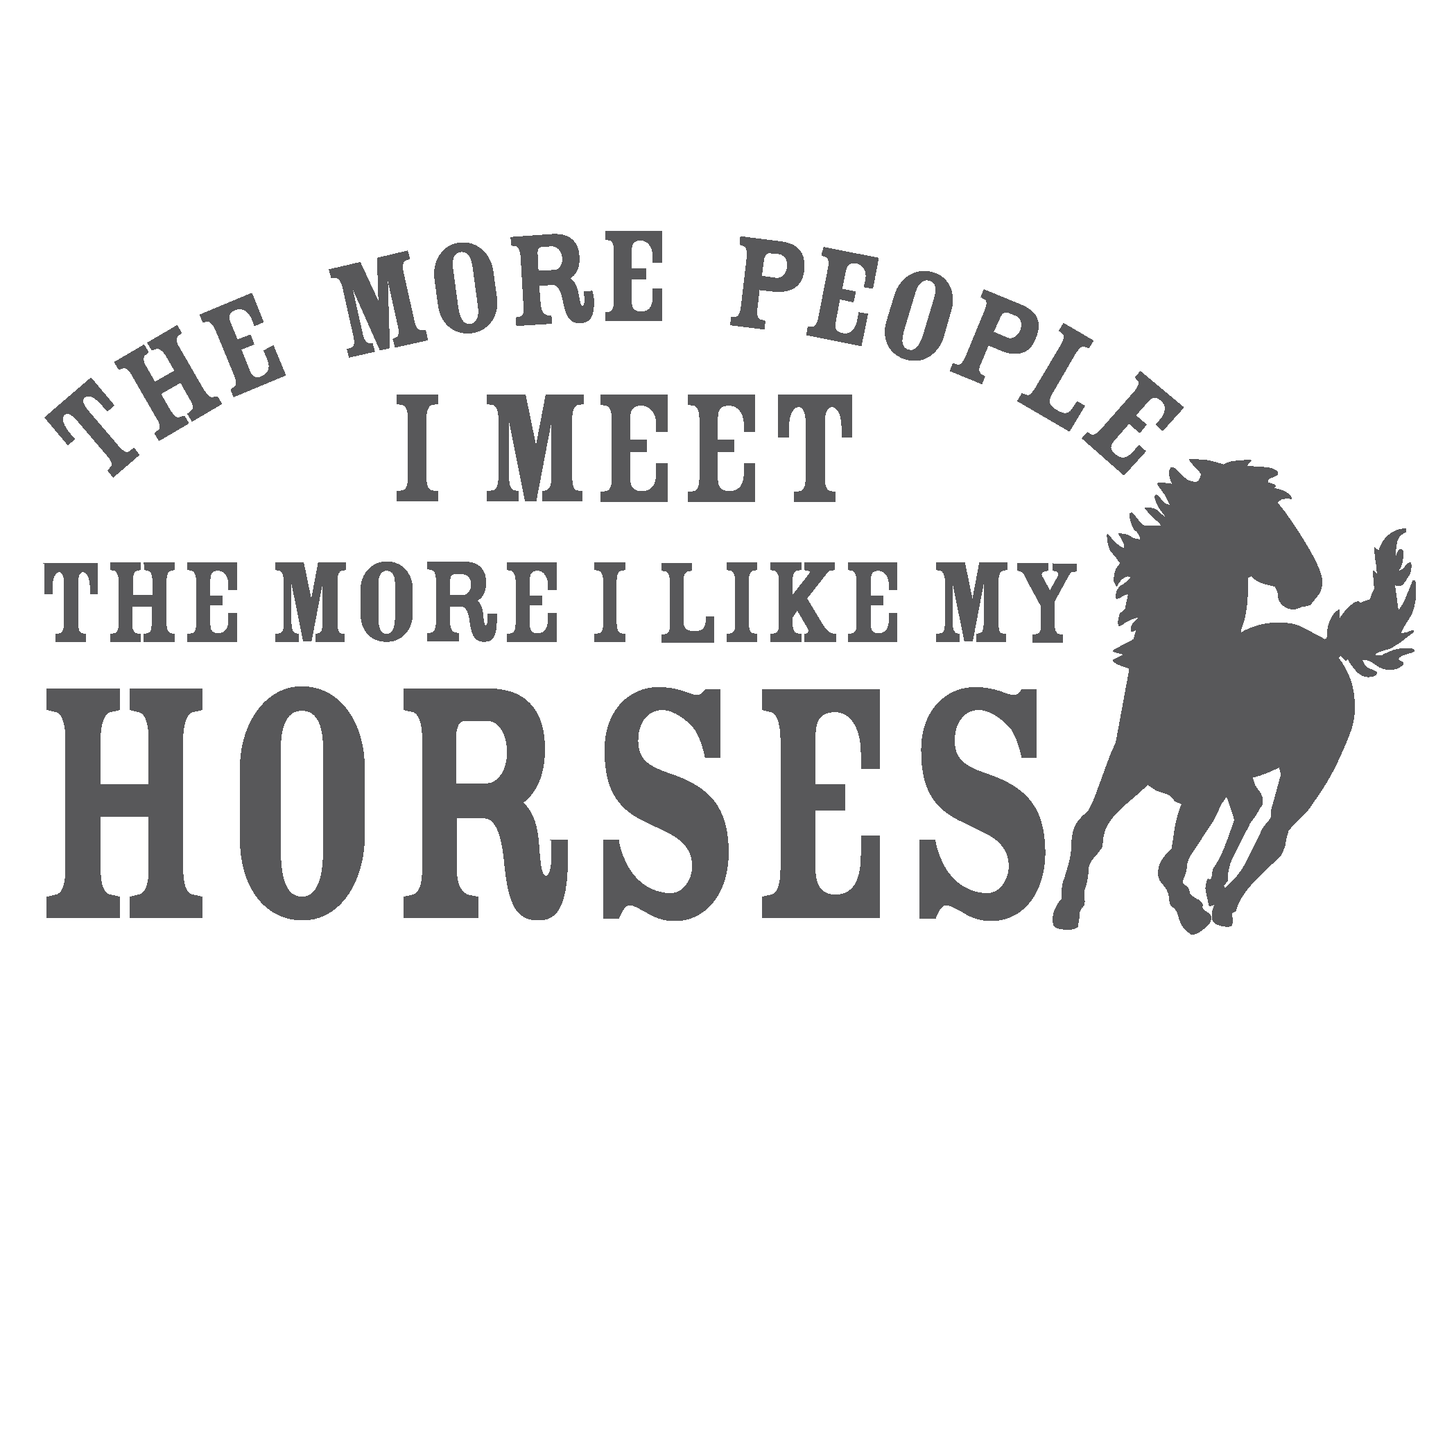 ShopVinylDesignStore.com The More People I Meet The More I Like My Horses Wide Shop Vinyl Design decals stickers